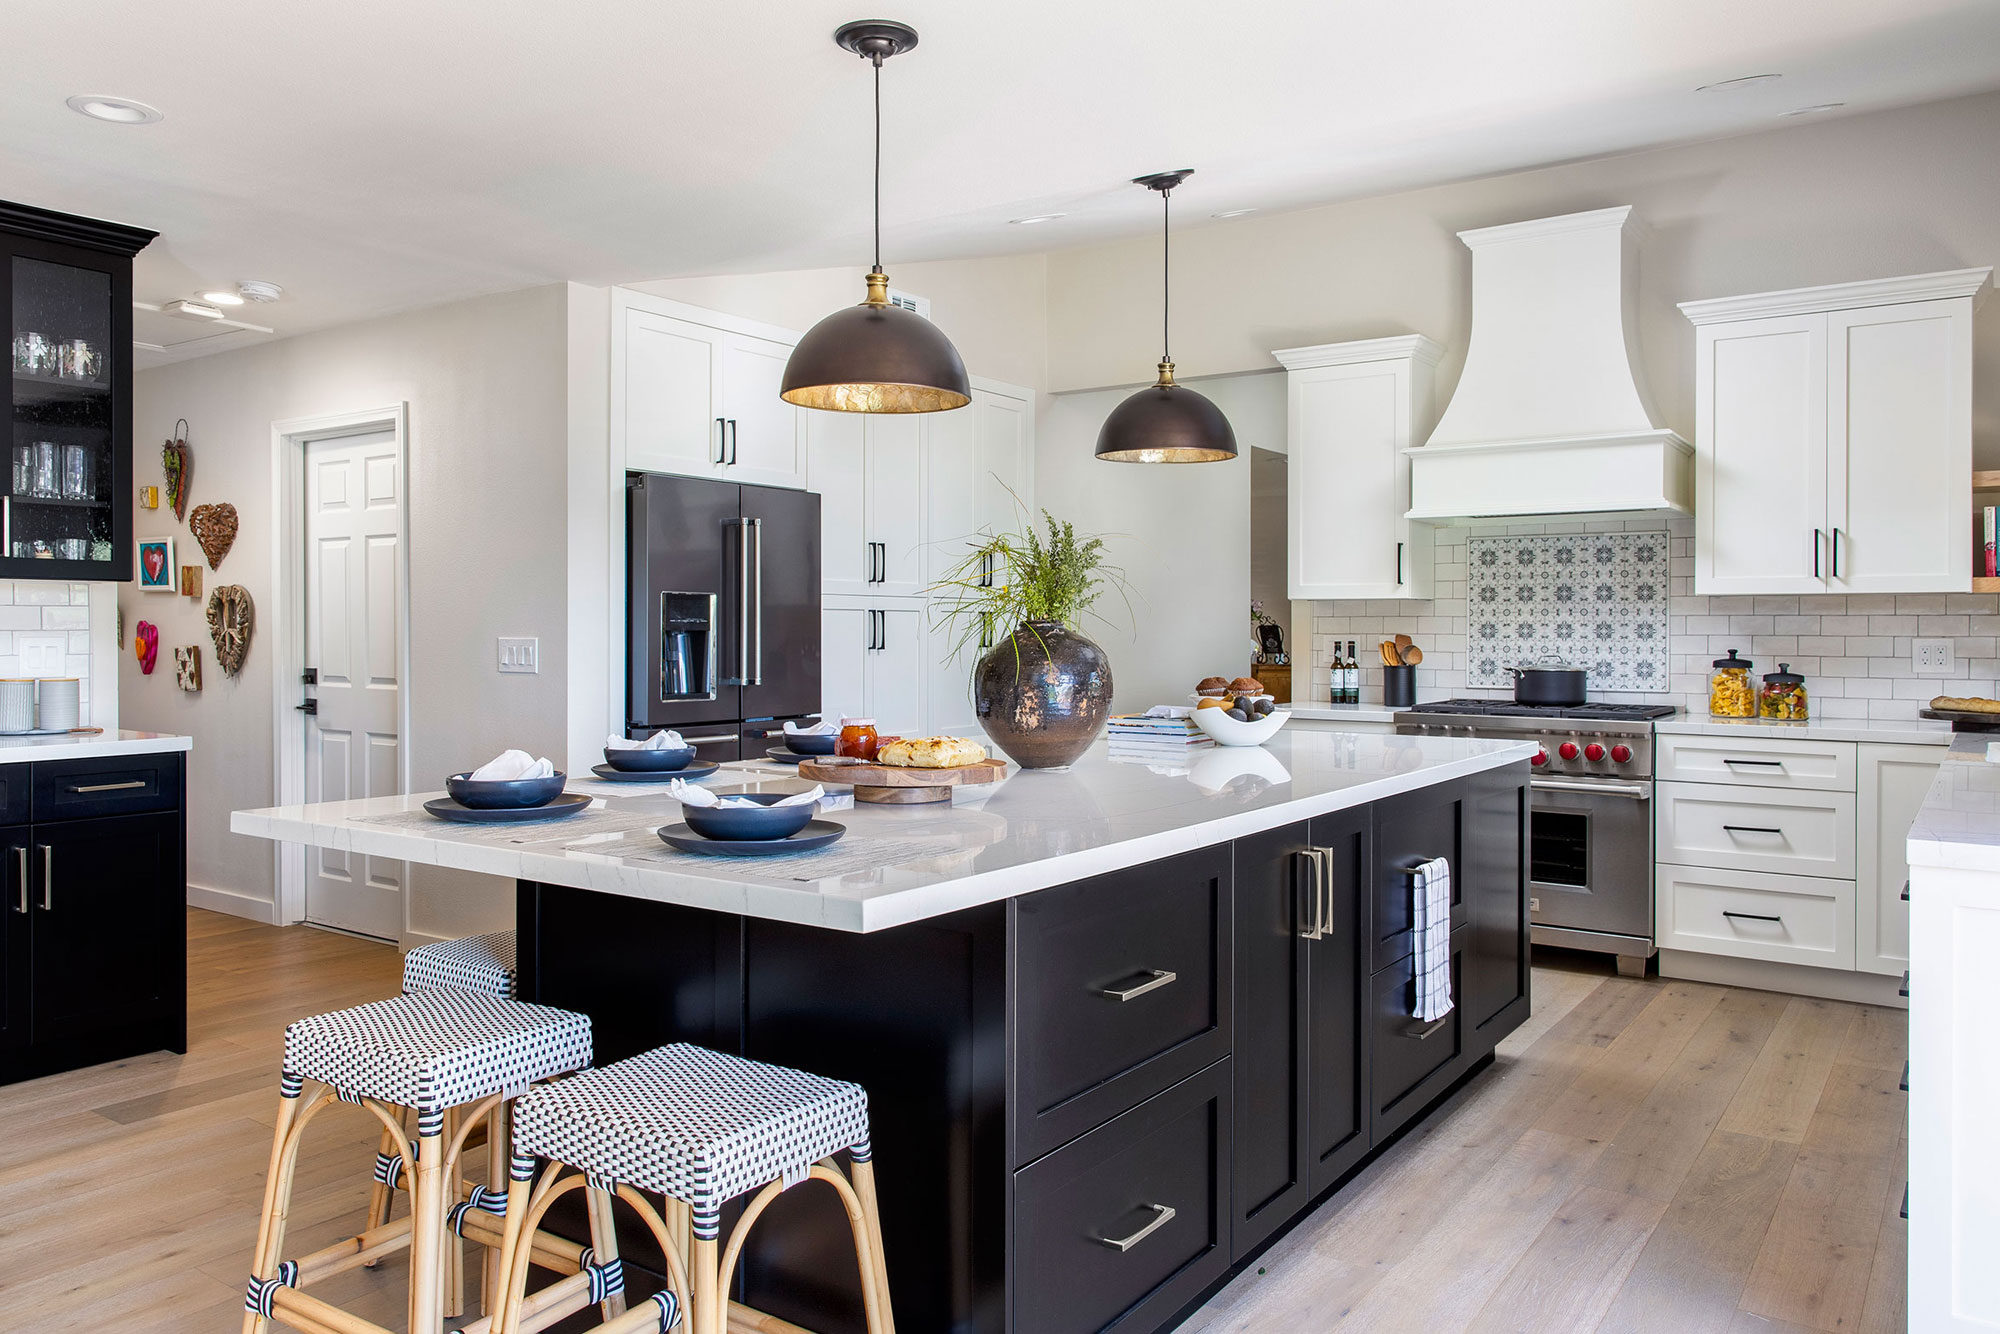 Solvang Kitchen Remodel shown in Contemporary Farmhouse style